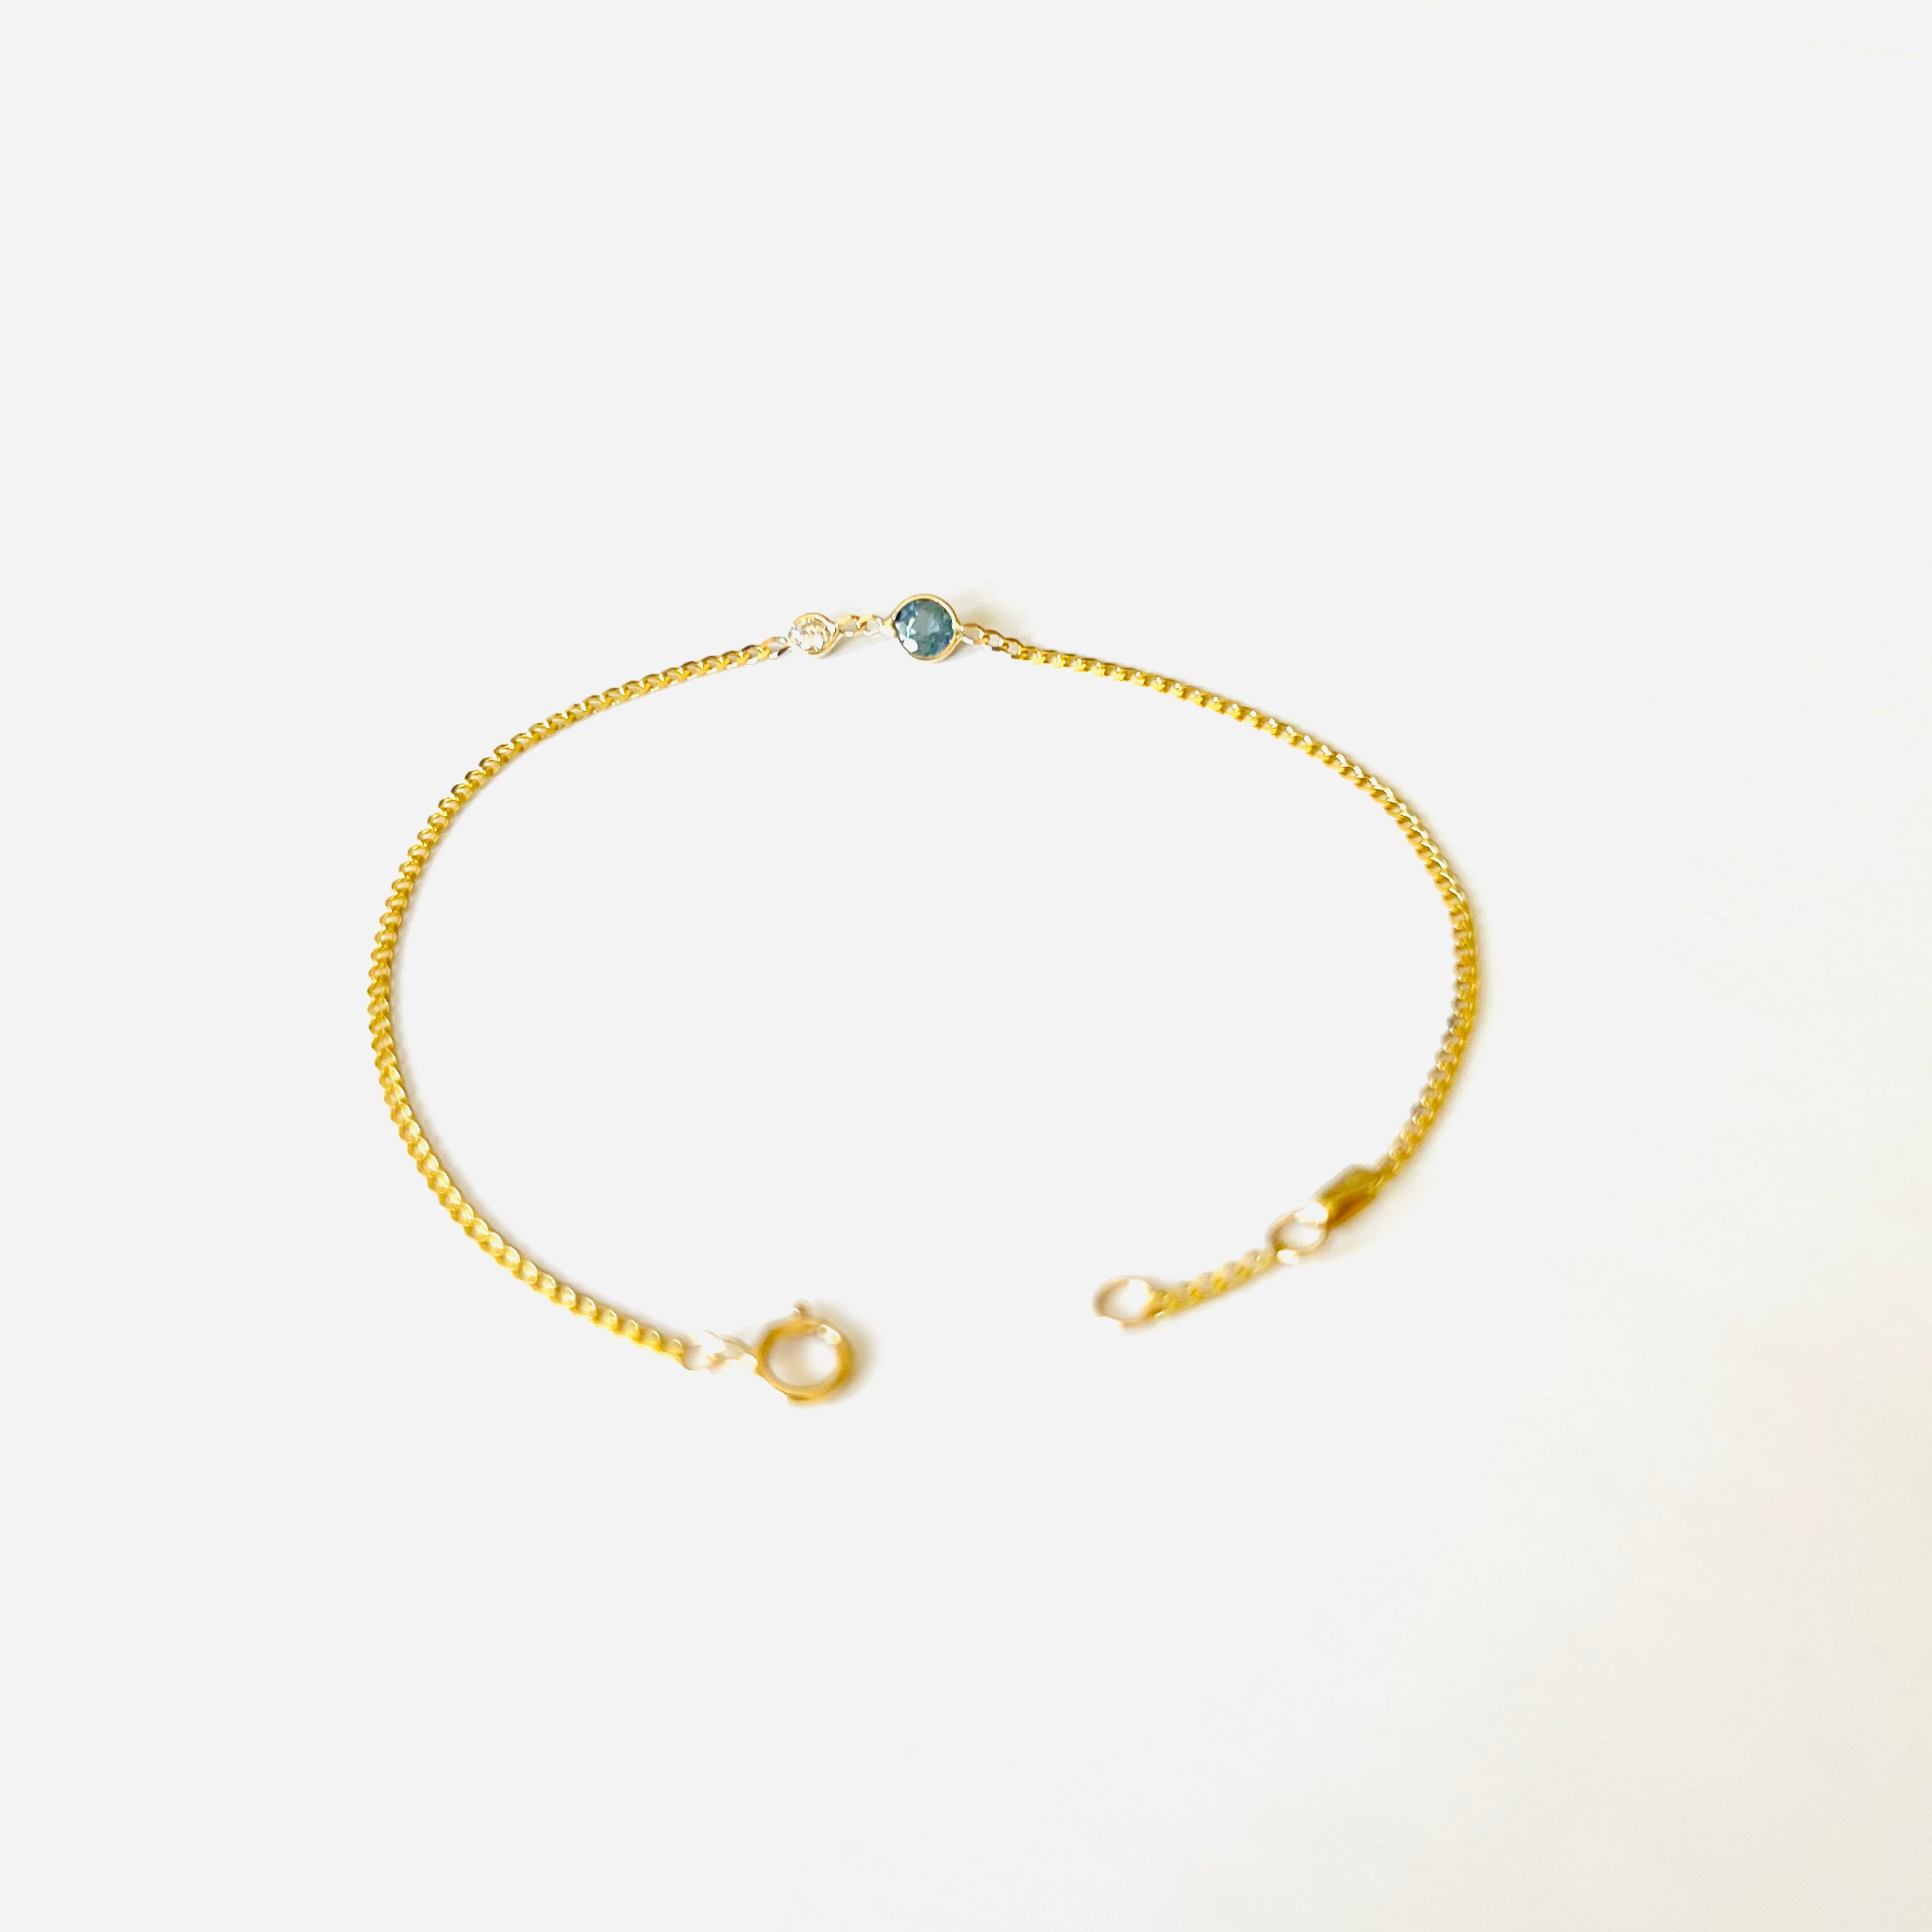 Sapphire And Diamond Bracelet in Solid 14k Yellow Gold 7"